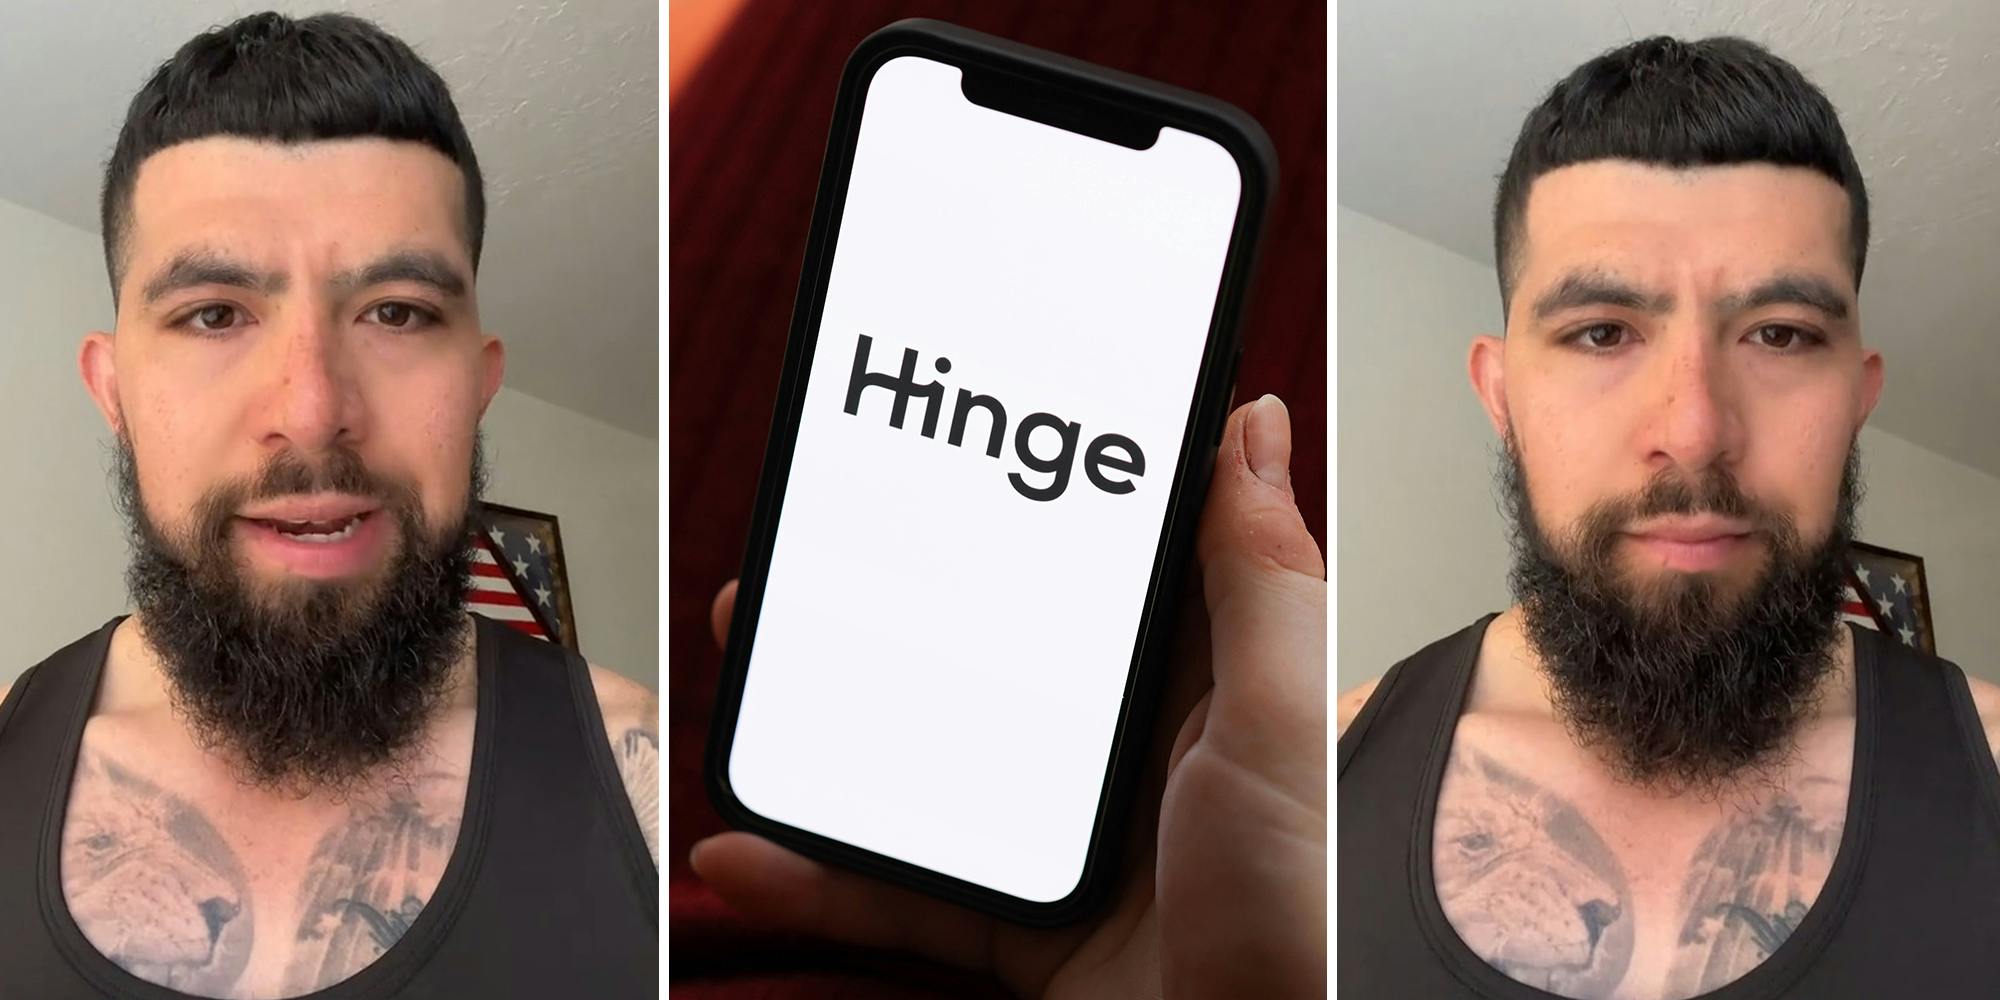 ‘You think I’m stupid?’: Hinge user shares why he dined and dashed on a hibachi date. Viewers are on his side